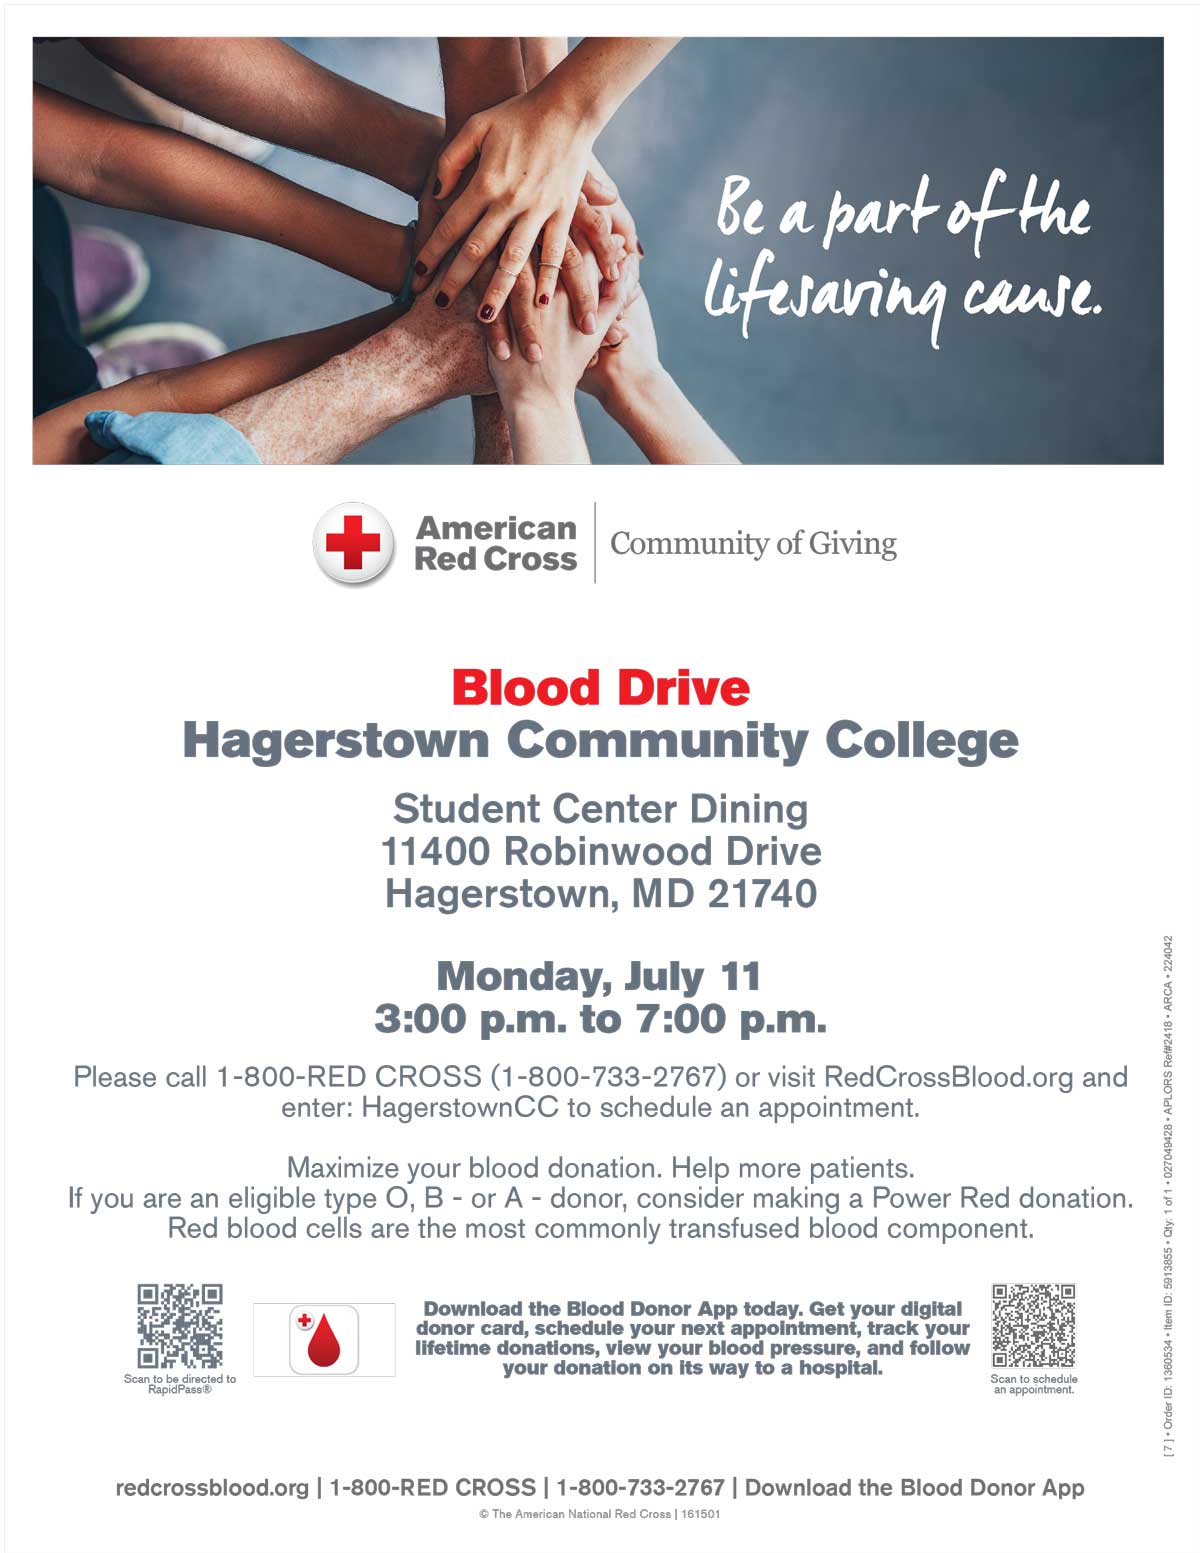 A Flyer for the HCC Blood Drive